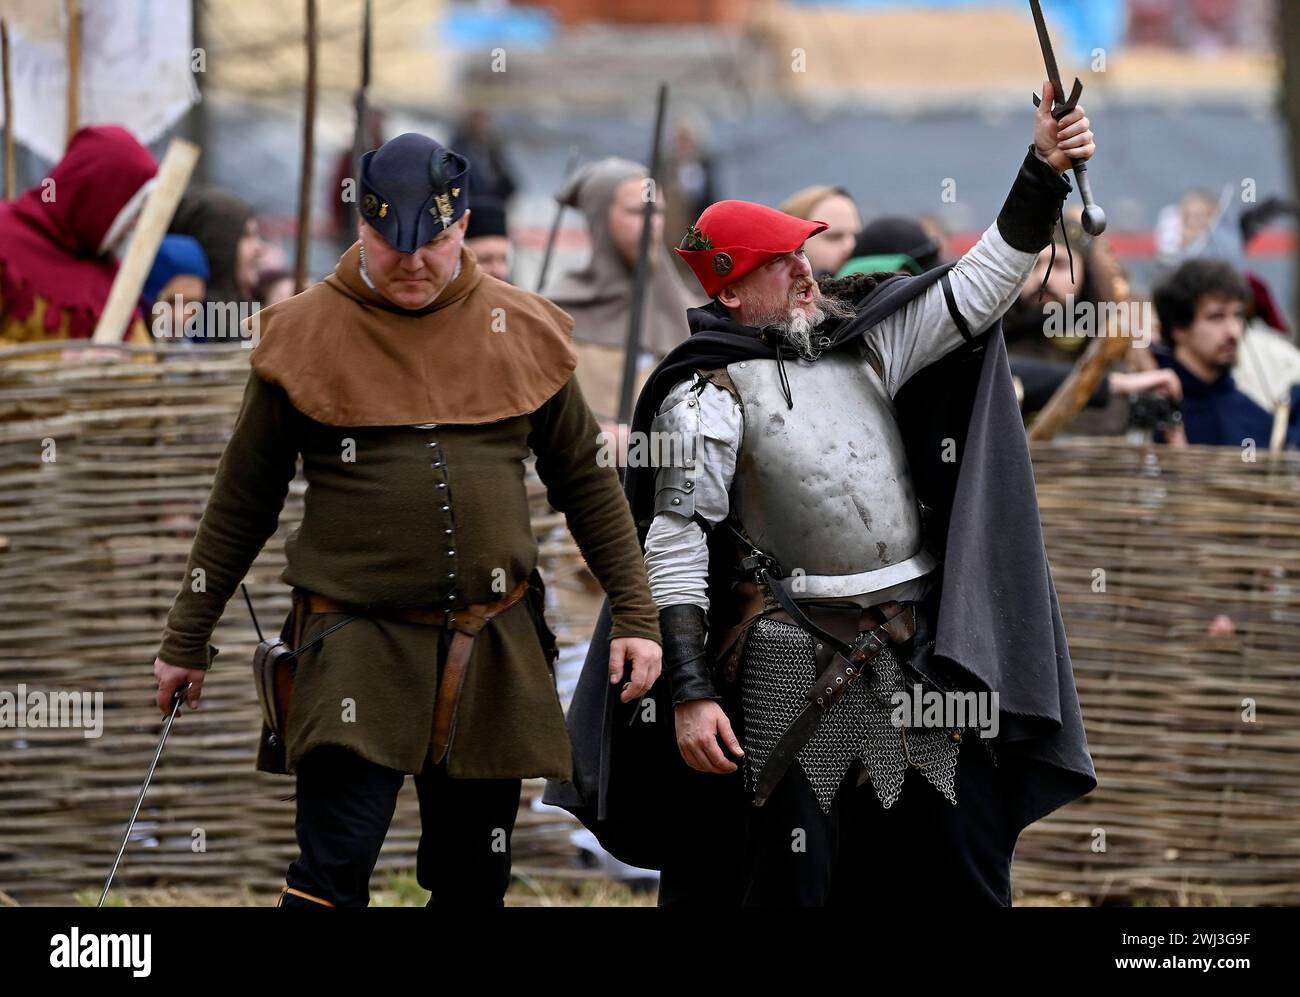 Donja Stubica, Croatia, 100224. Reconstruction of the historical battle between the serfs led by Matija Gubec and the army of the Hungarian-Croatian nobleman Ferenc Franjo Tahi from 1573, which marks the 451st anniversary of the Peasants Revolt in Donja Stubica. Photo: Ronald Gorsic / CROPIX Copyright: xxRonaldxGorsicx/xCROPIXx seljacka buna15-100224 Stock Photo